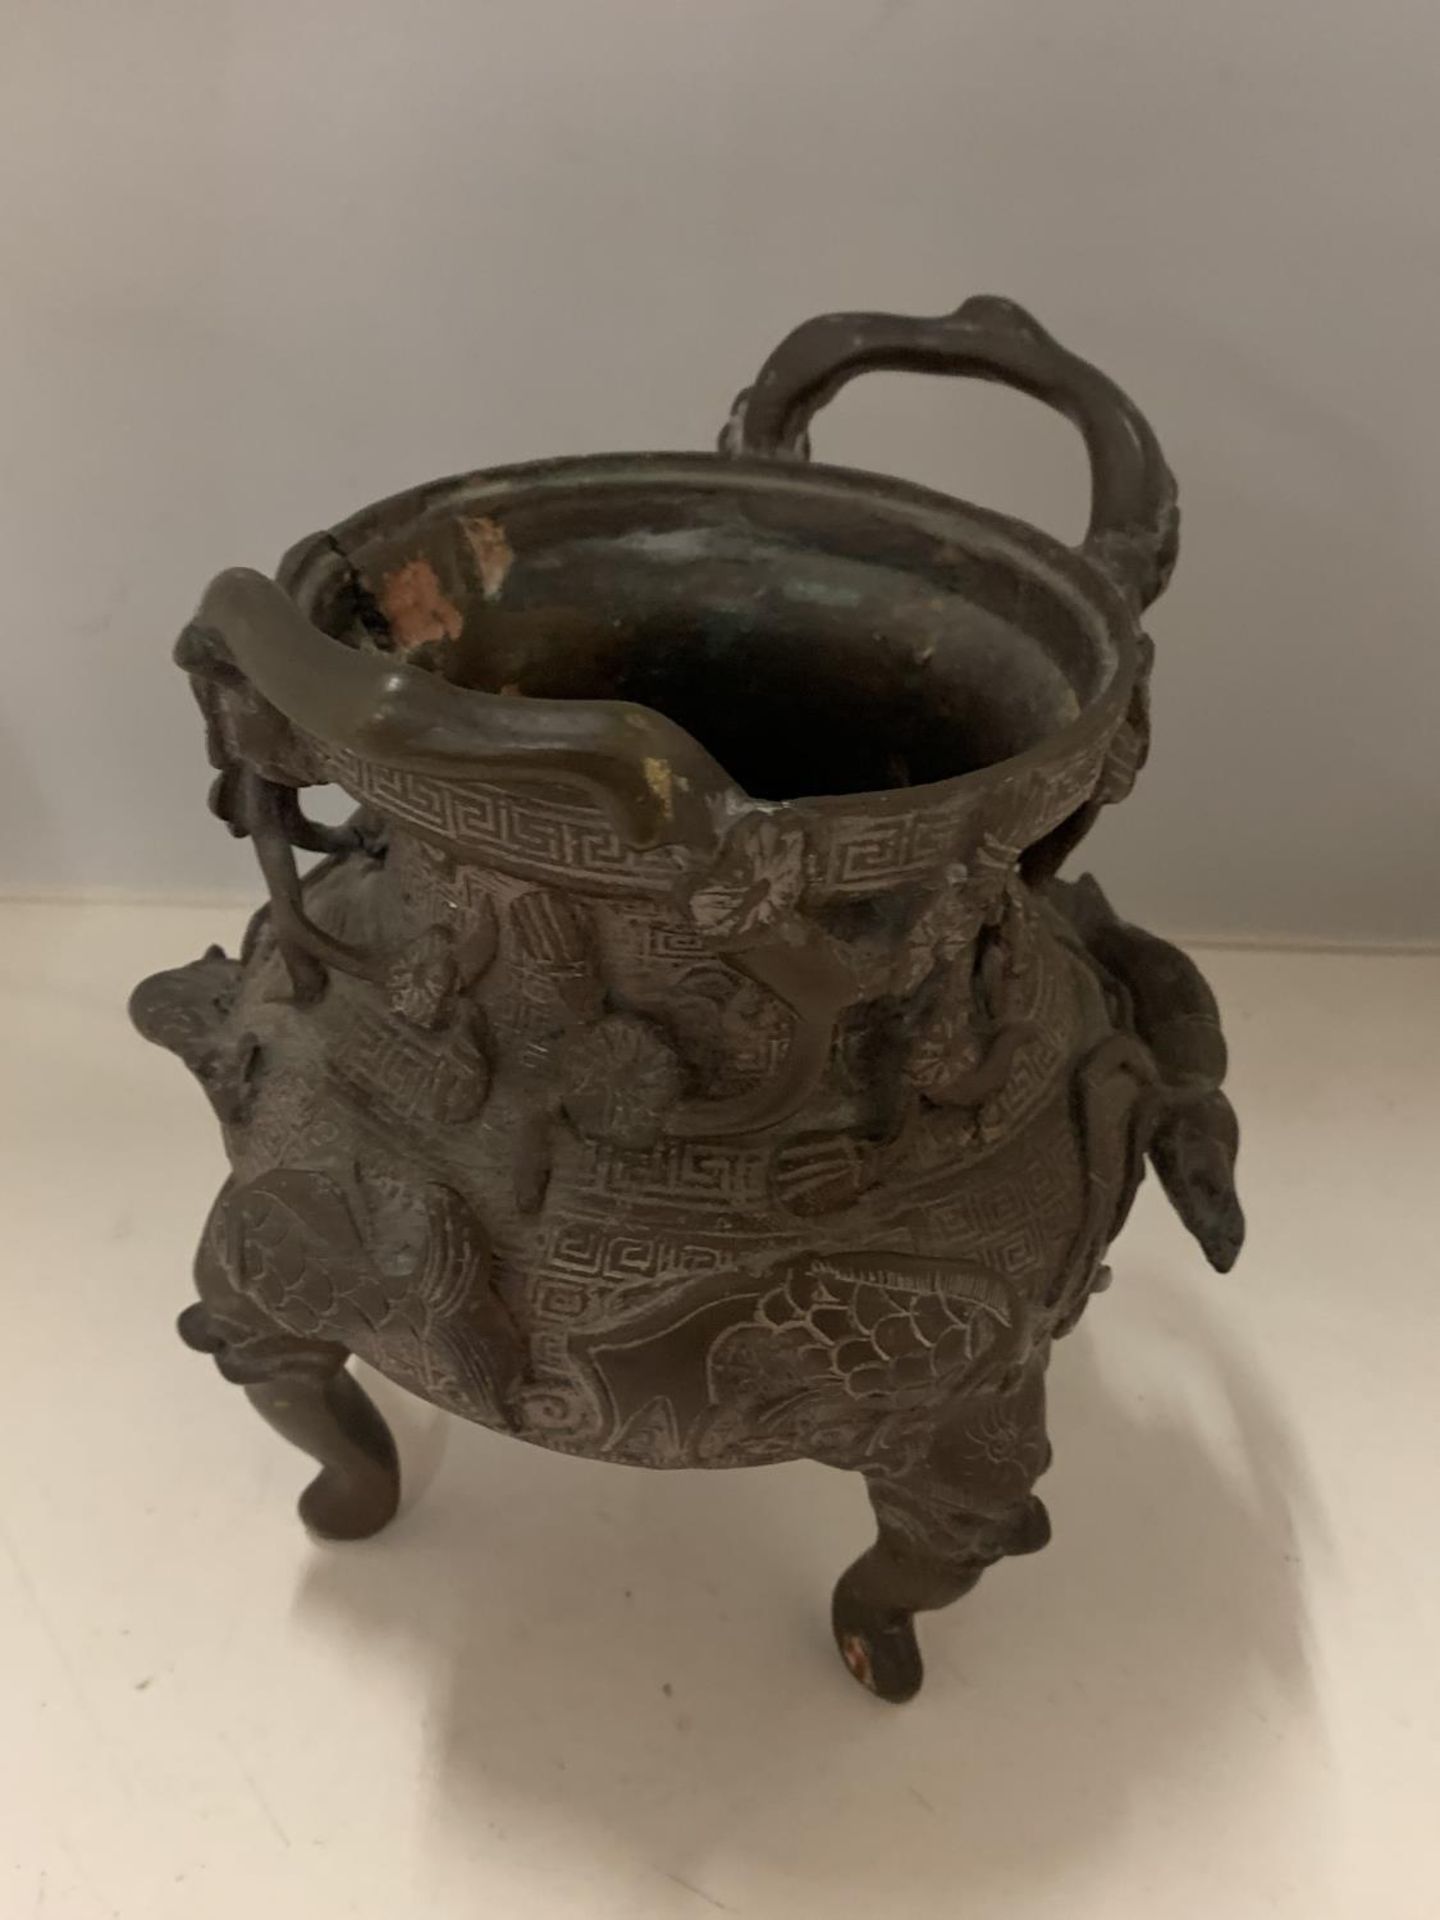 A BRONZE TWIN HANDLED ORIENTAL DESIGNED RINSE CENSOR BOWL DEPICTING FISH AND CHINESE STYLE DRAGON